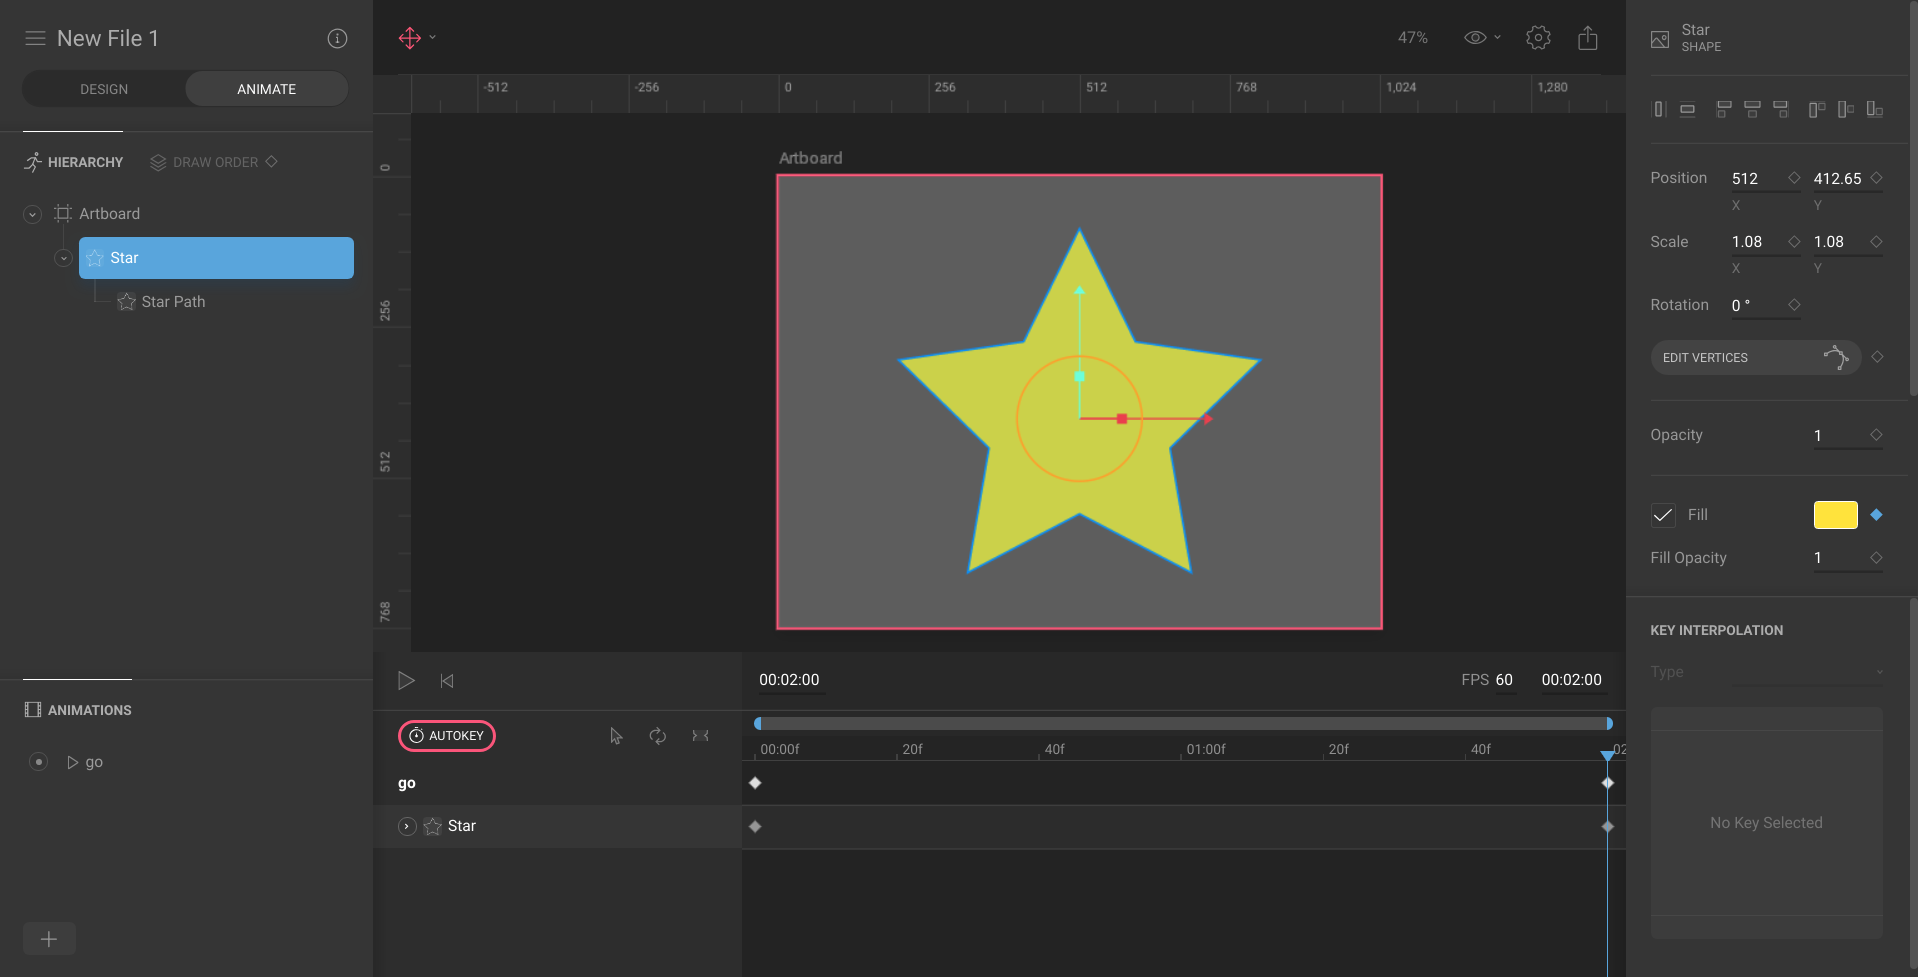 Animate the fill color of the star